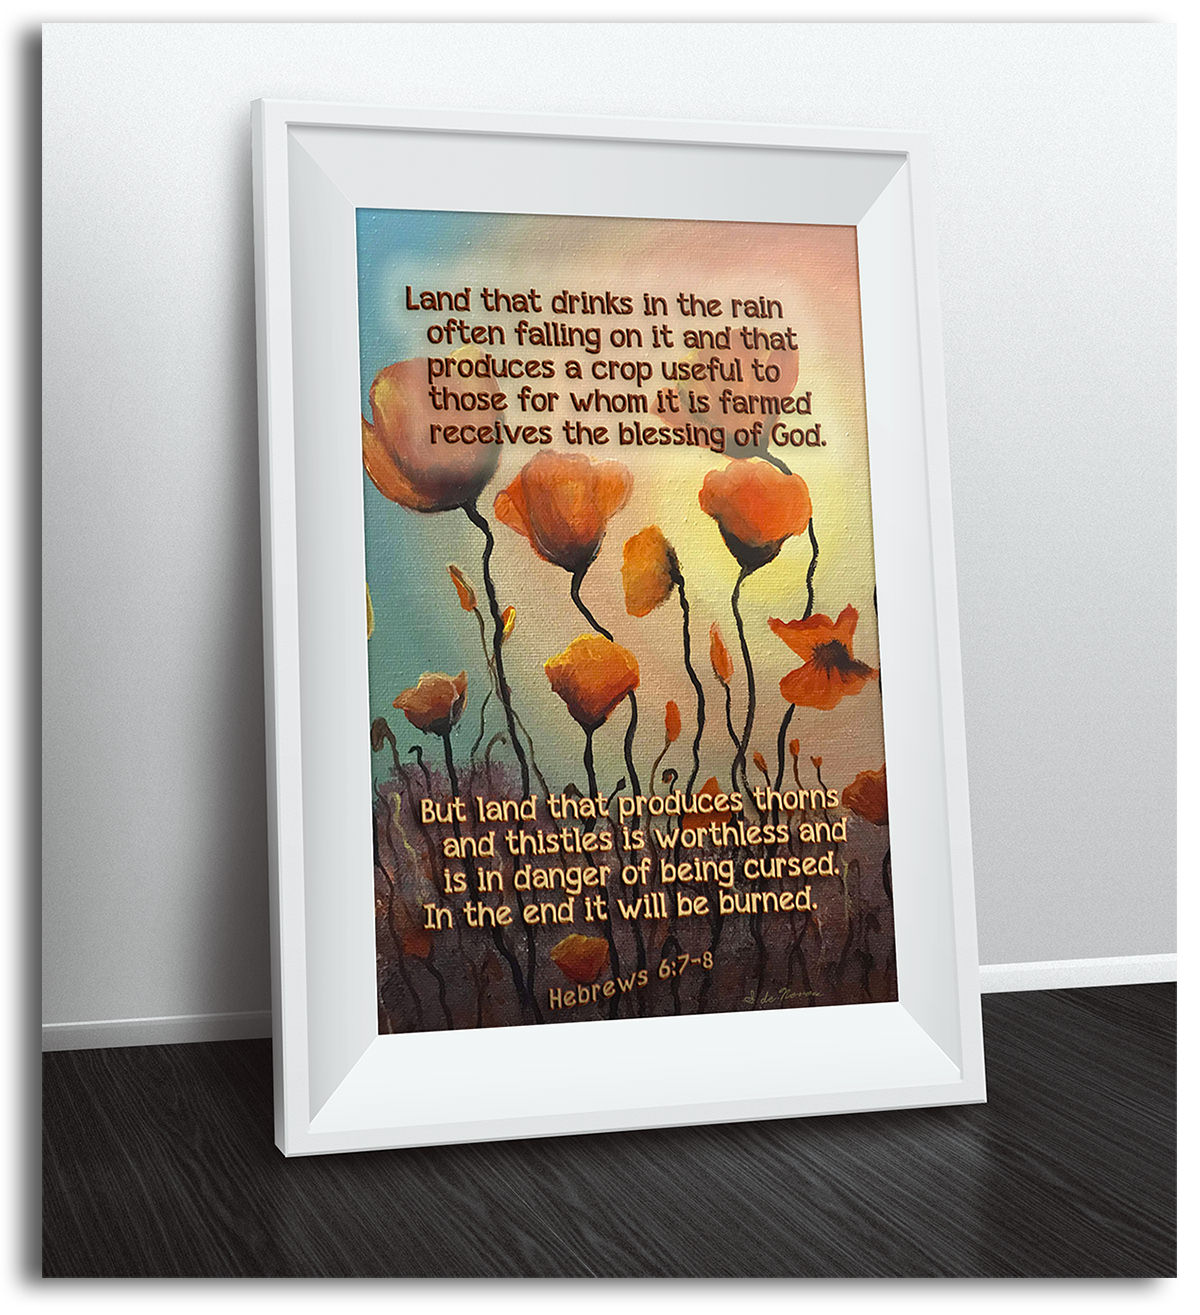 Scripture picture of Hebrews 6:7-8, emphasizing the biblical image of two kinds of soil